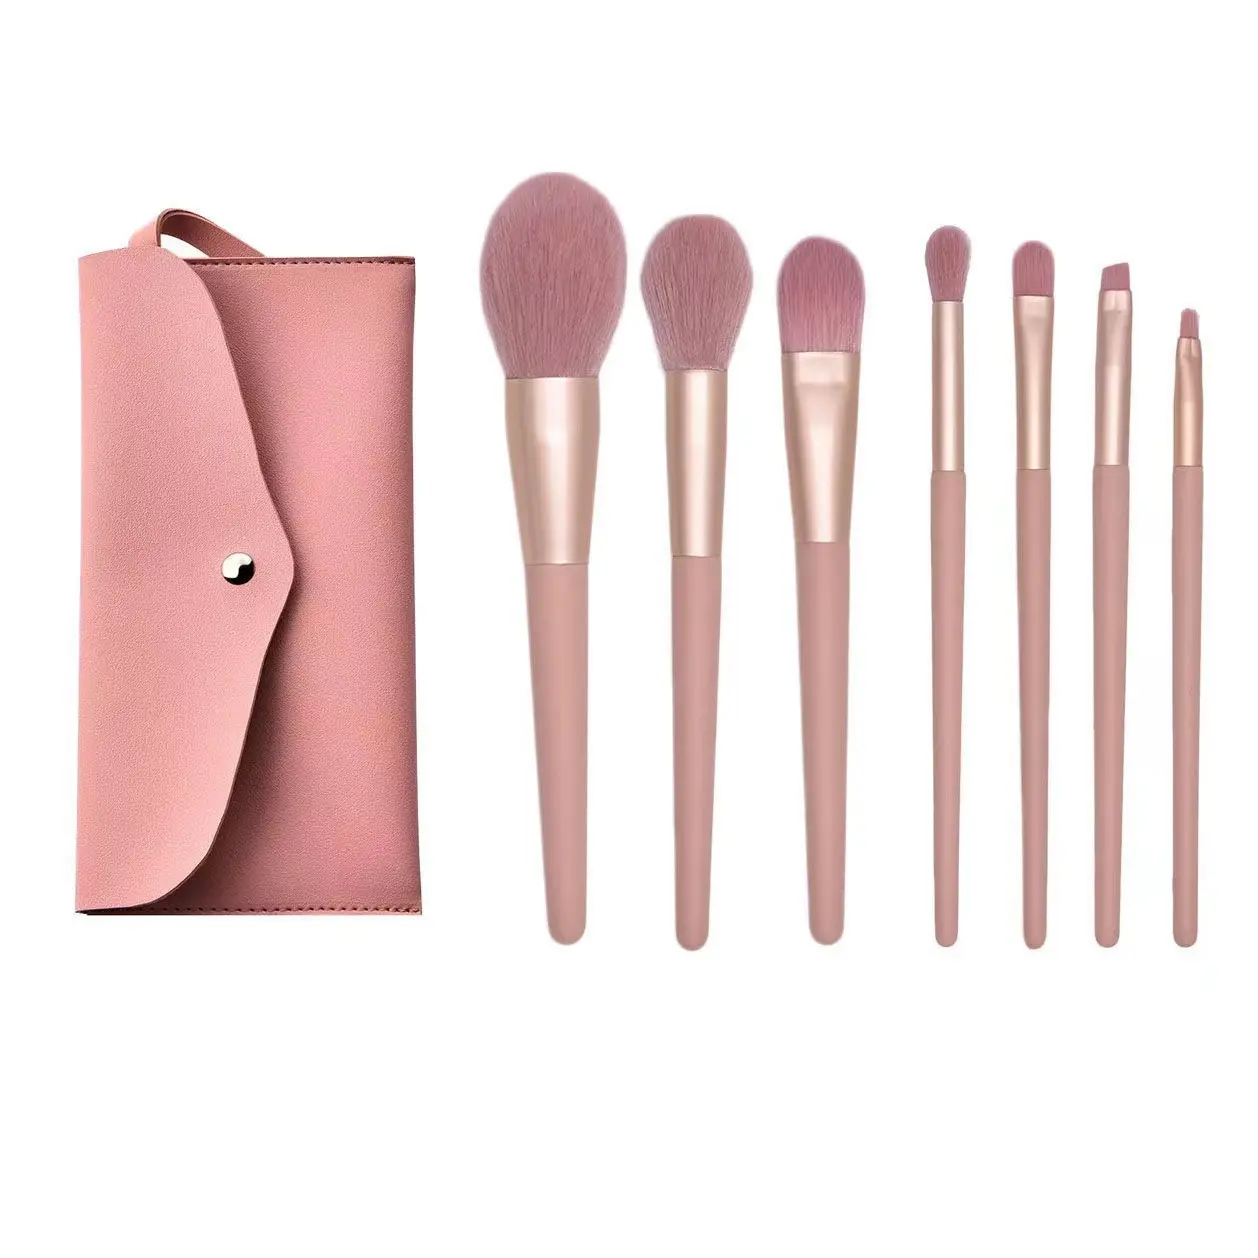 Enhance Your Beauty Routine with the Nude Powder Girl Heart Makeup Brush Set: Experience the Super Soft Powder Brushes and Eye